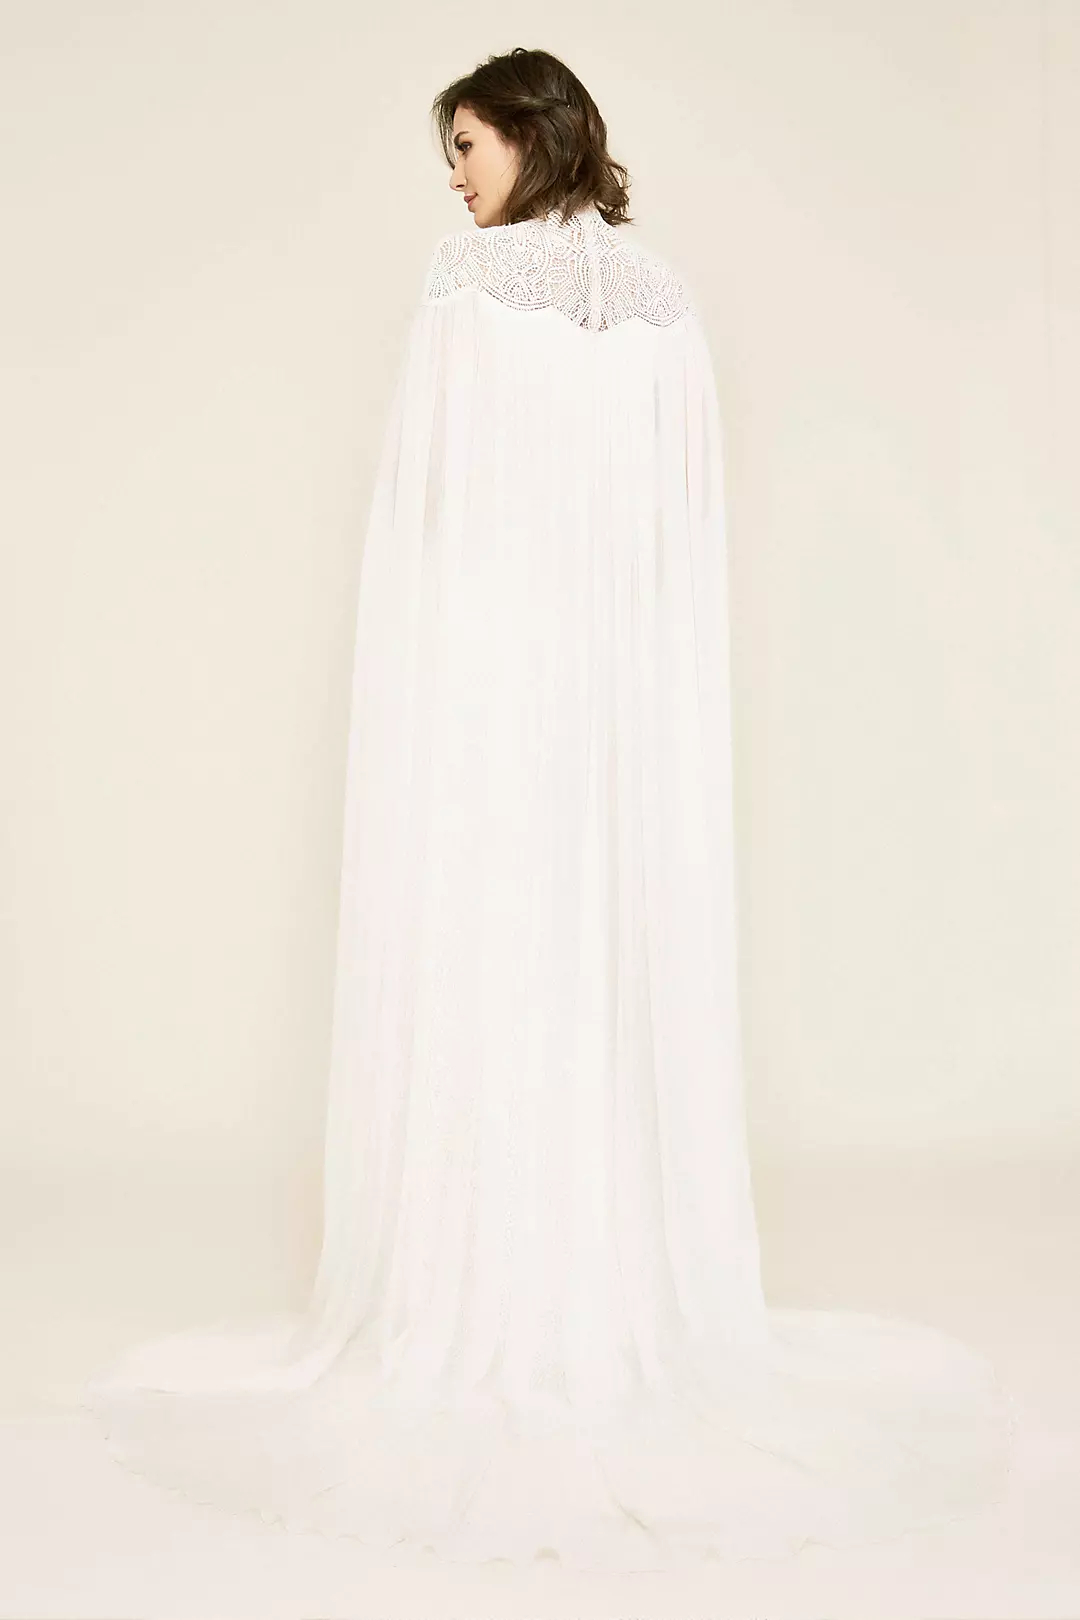 Caspian Lace Wedding Gown with Chiffon Cape